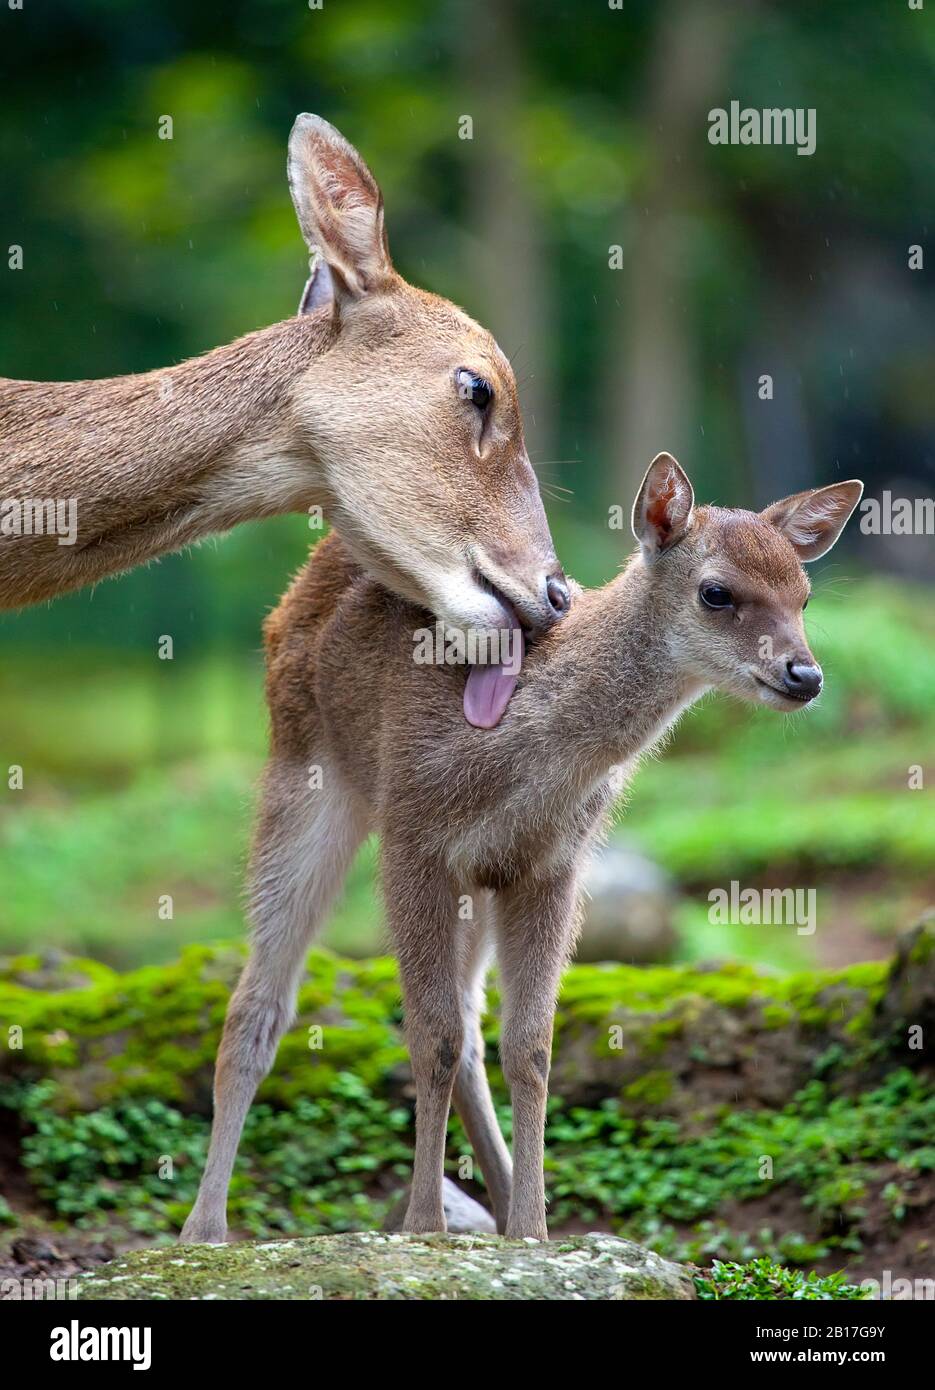 A Doe and fawn in the rain with the mother showing tender care for her baby. Stock Photo